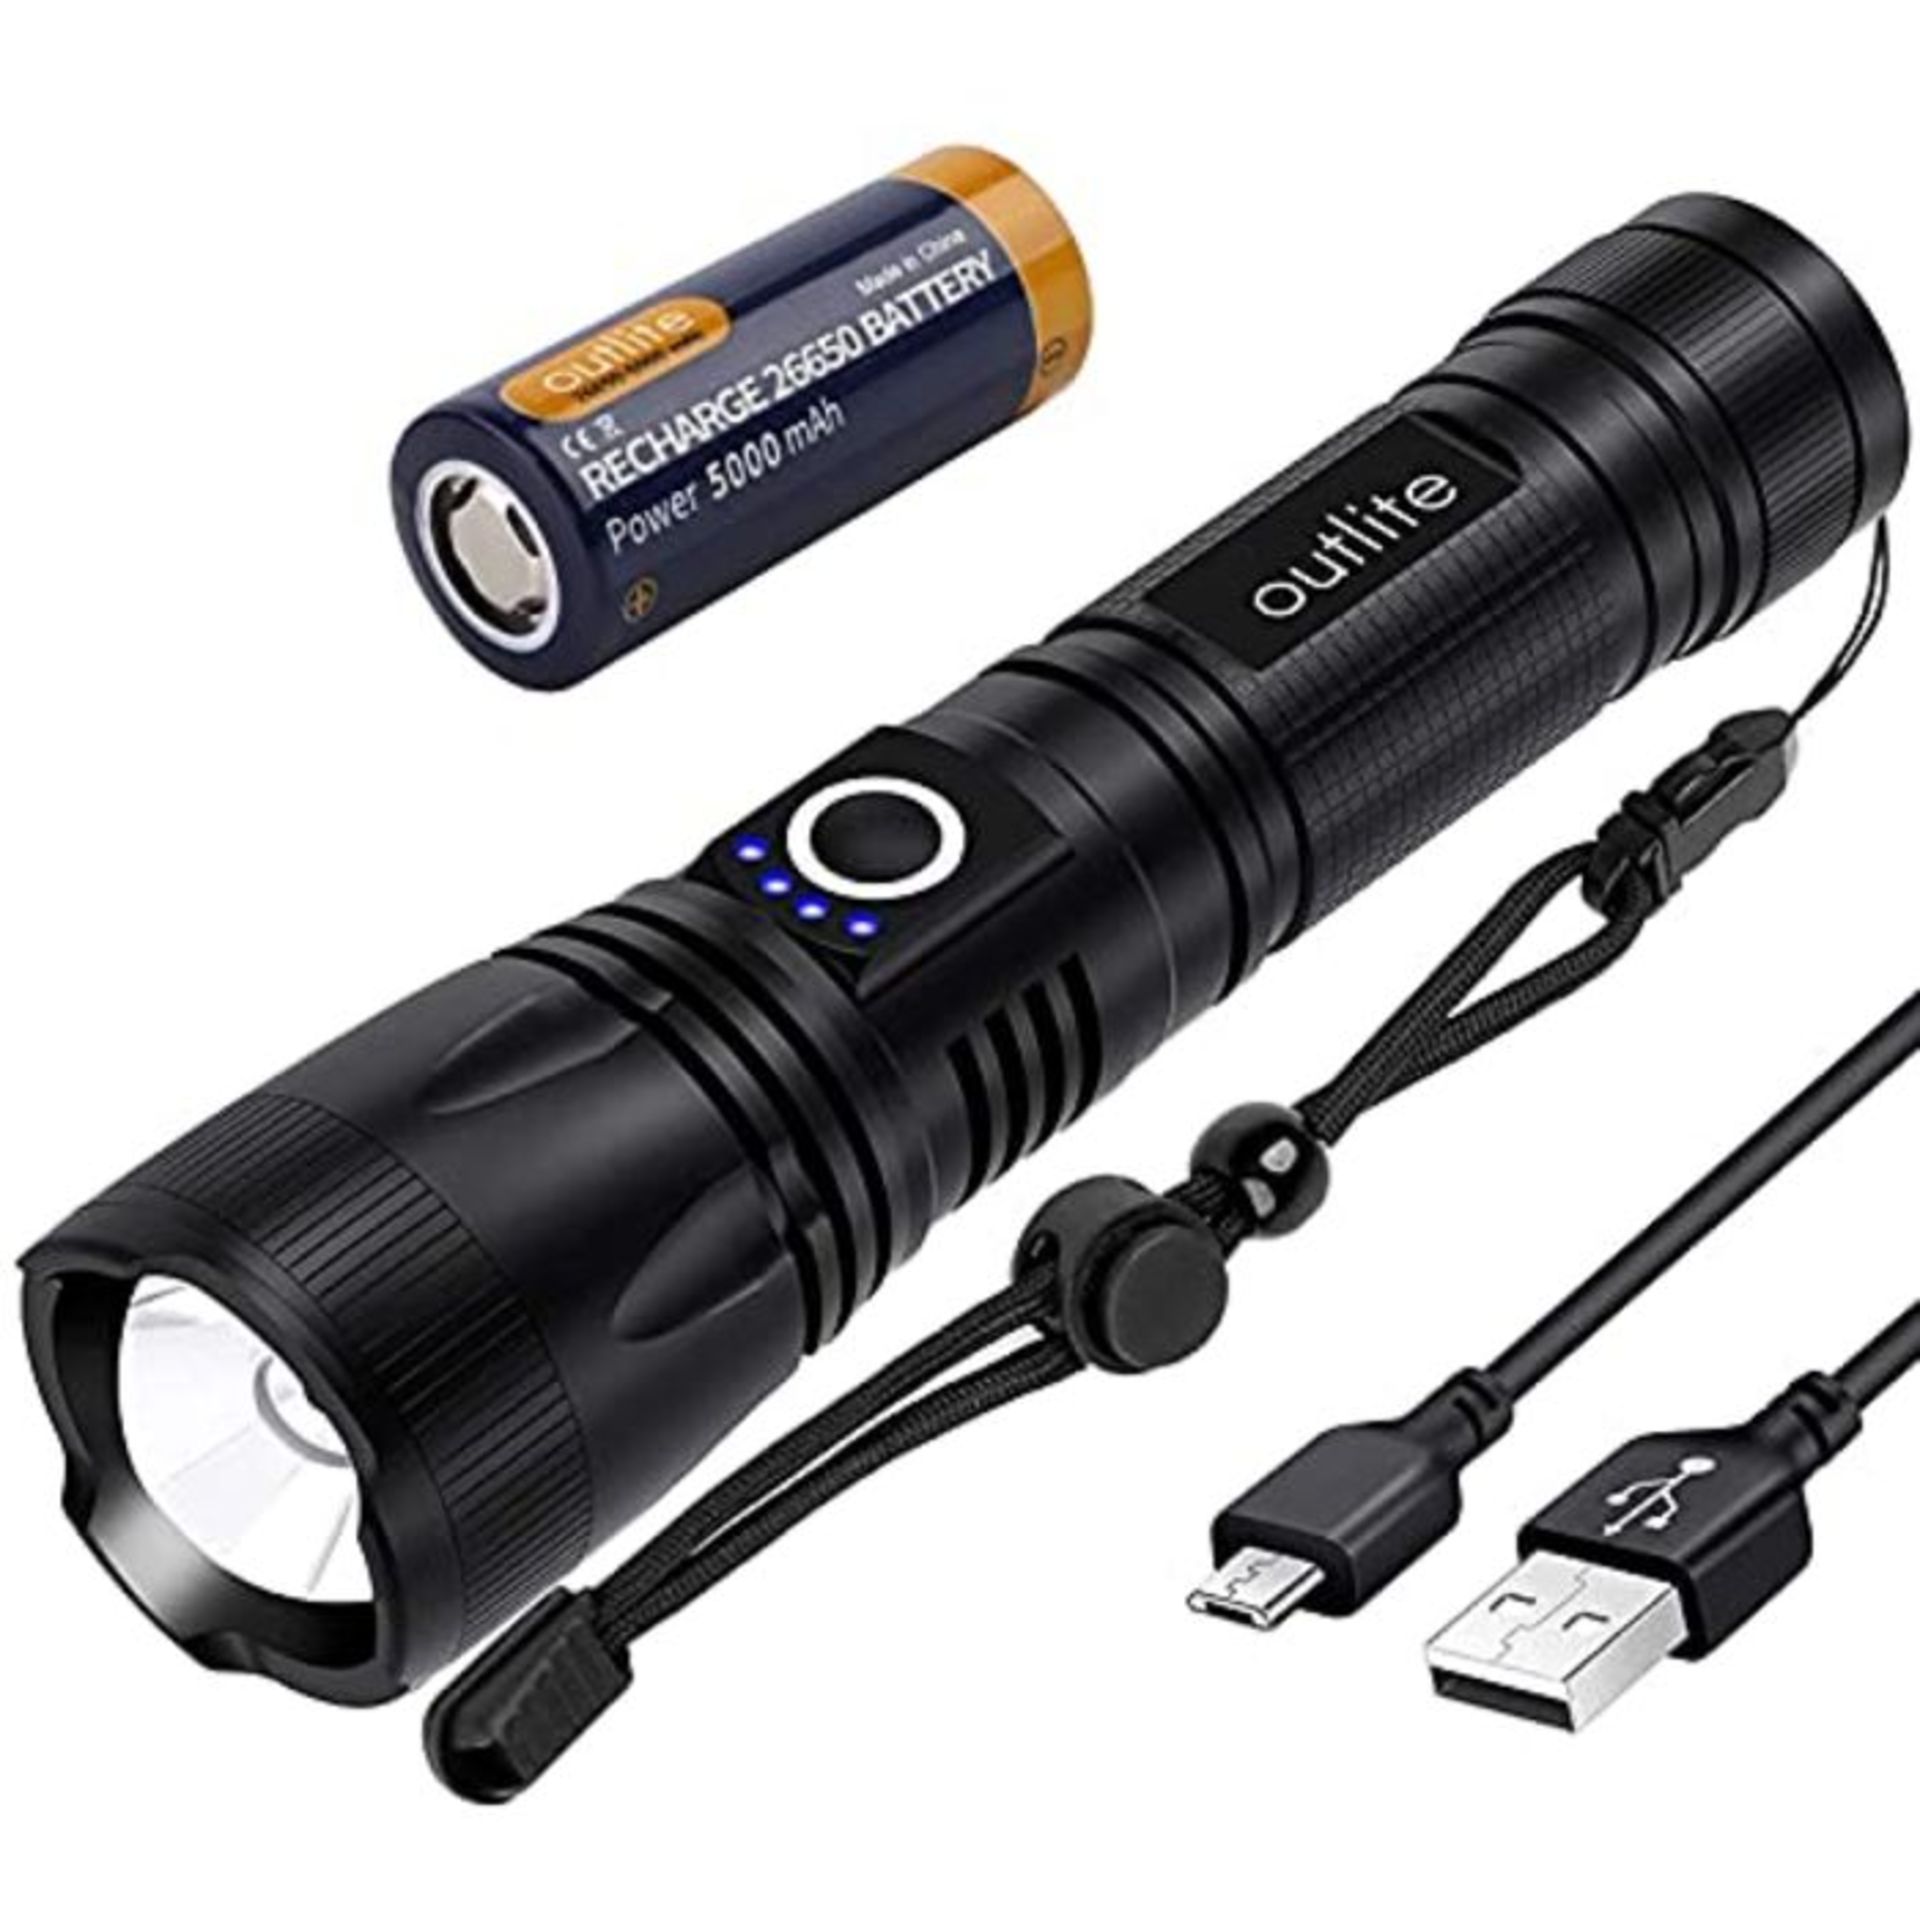 outlite Torch 5000 High Lumens, LED Torch 5000mAh USB Rechargeable 26650 Battery Inclu